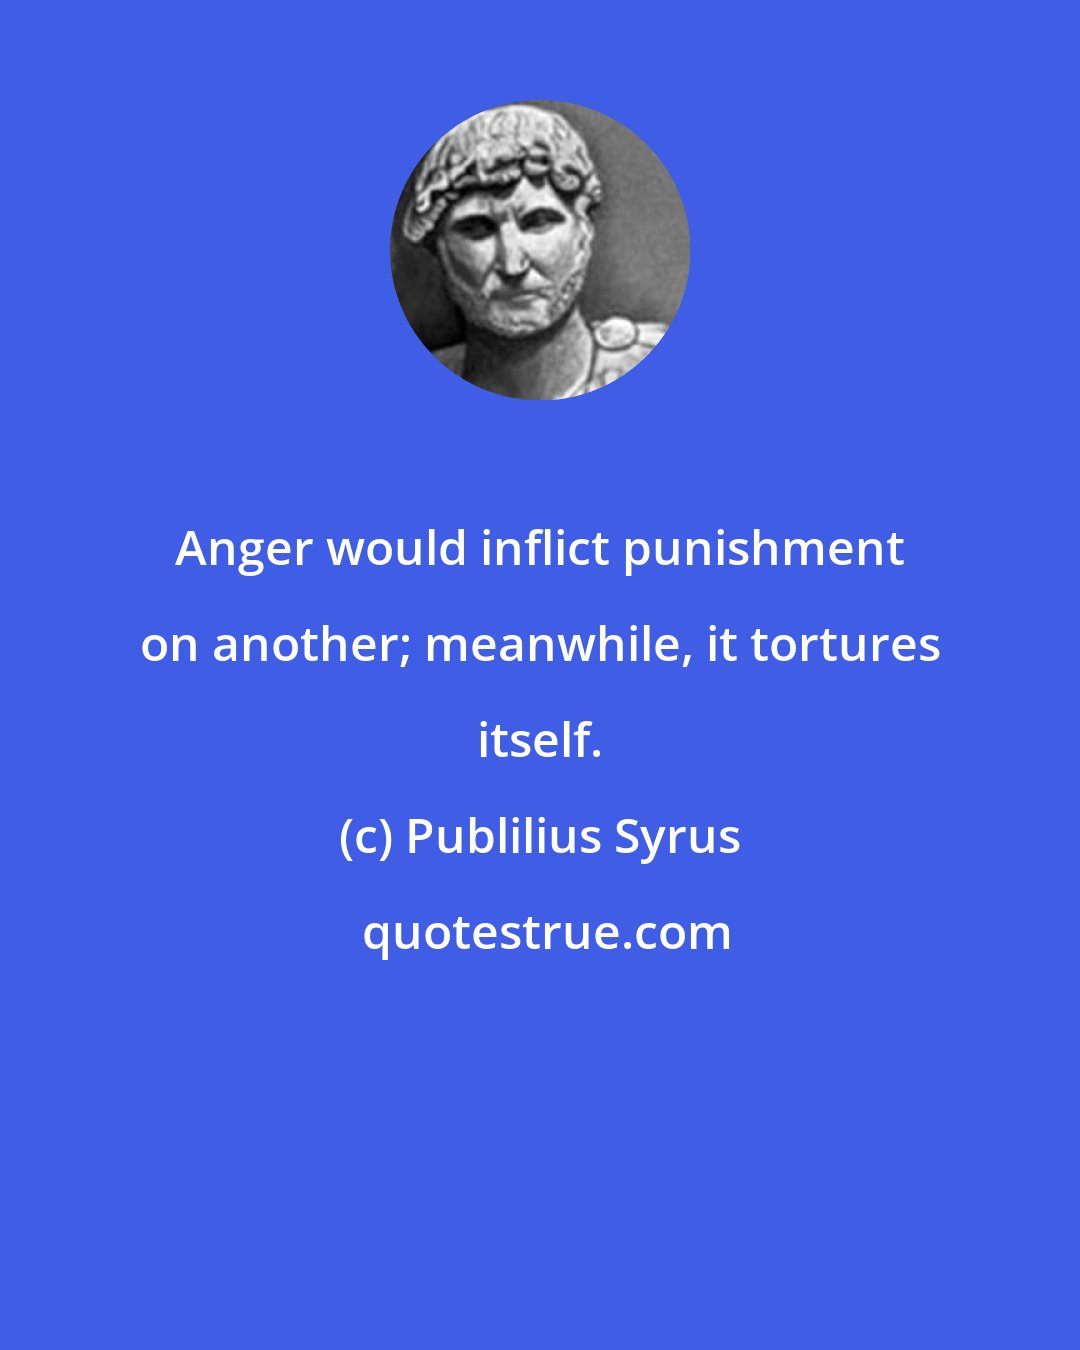 Publilius Syrus: Anger would inflict punishment on another; meanwhile, it tortures itself.